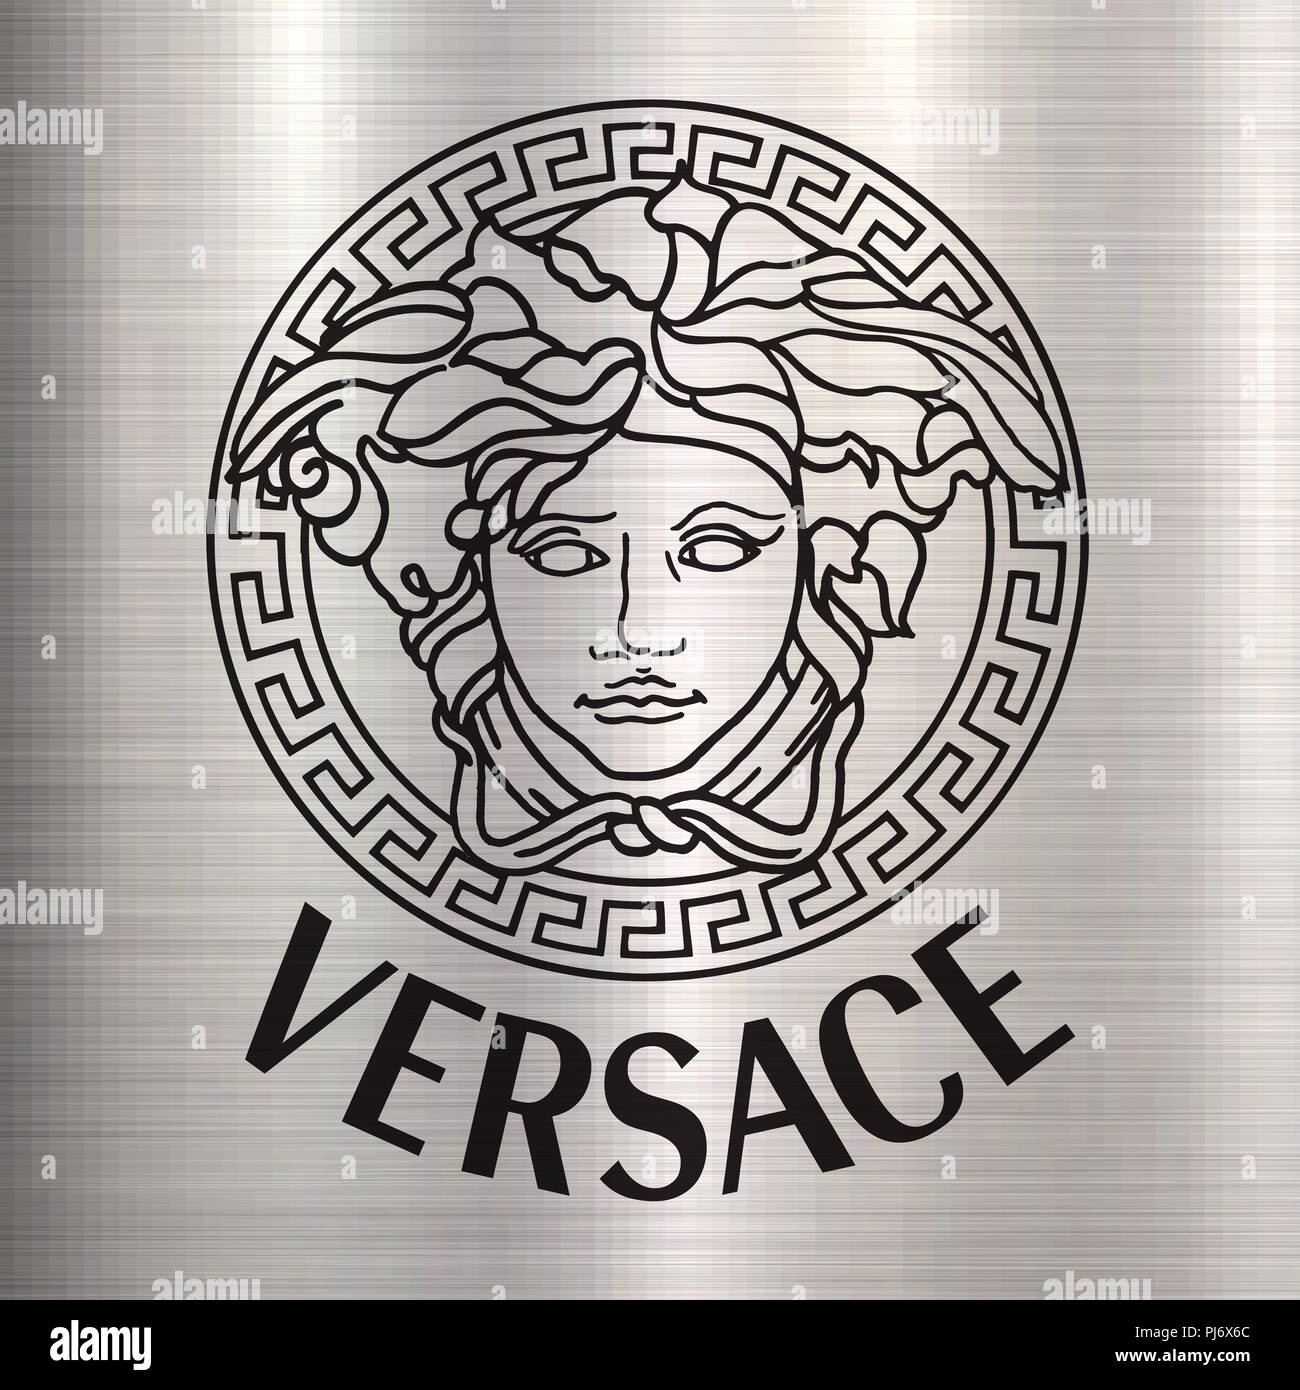 Top 99 versace logo on clothes most viewed and downloaded - Wikipedia